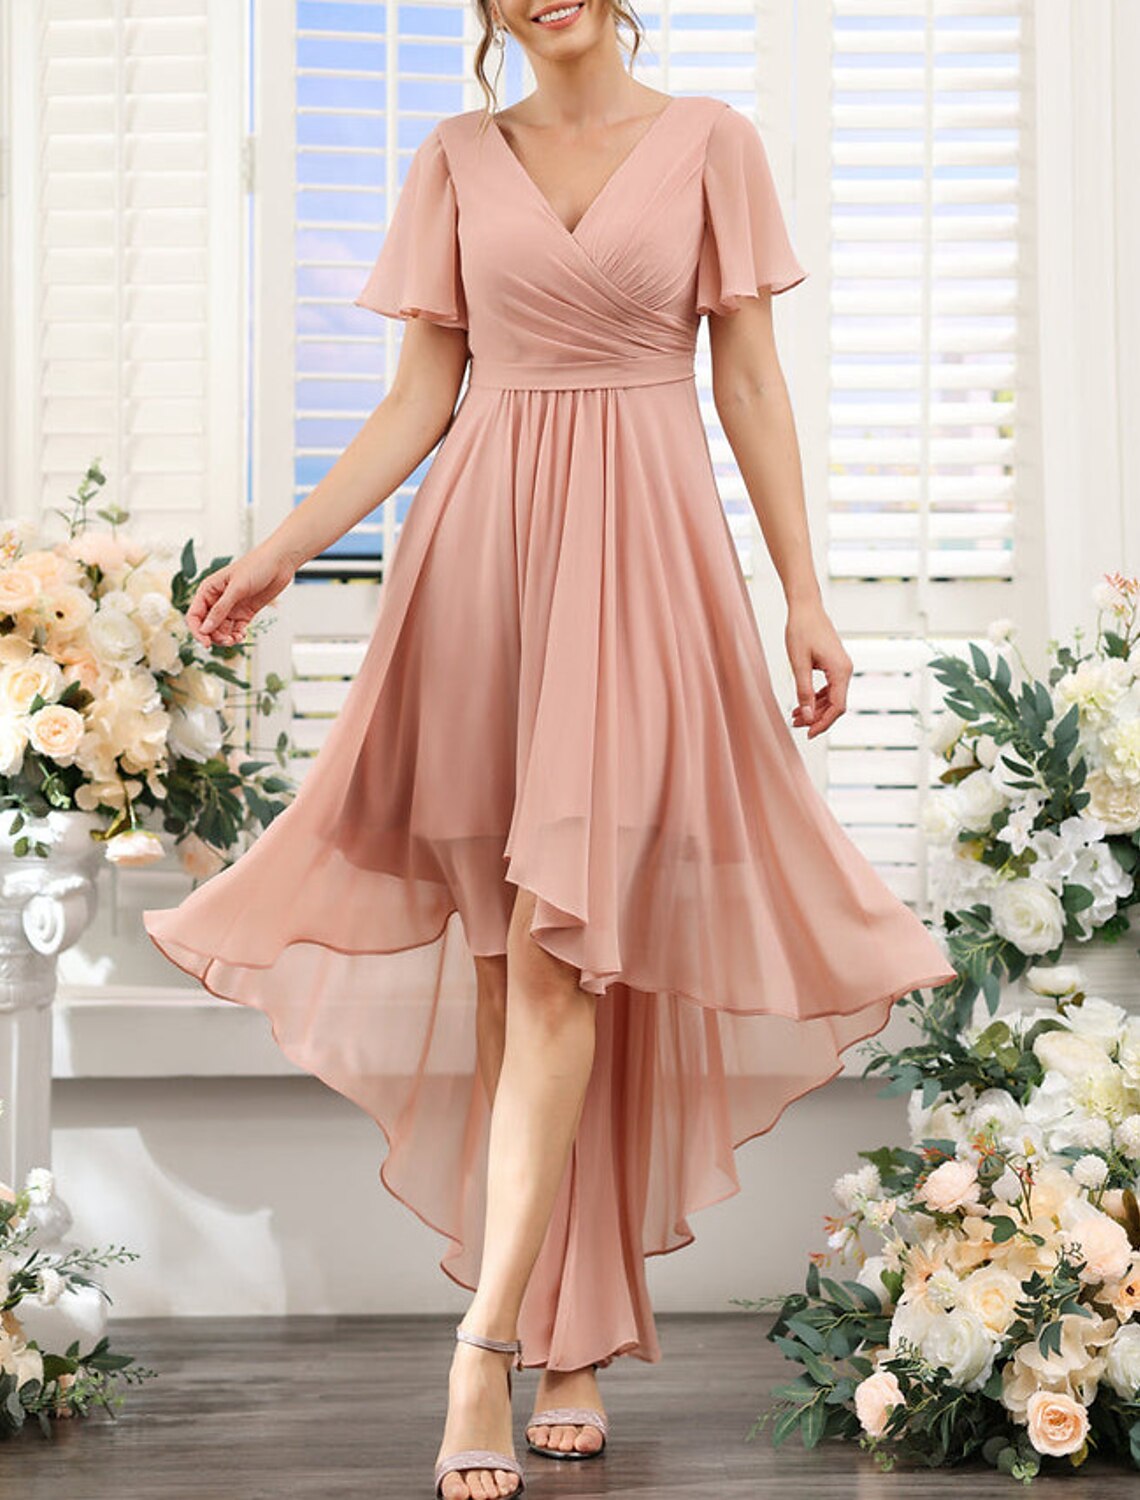 A-Line Bridesmaid Dress V Neck Short Sleeve Pink Asymmetrical Chiffon with Ruching / Solid Color